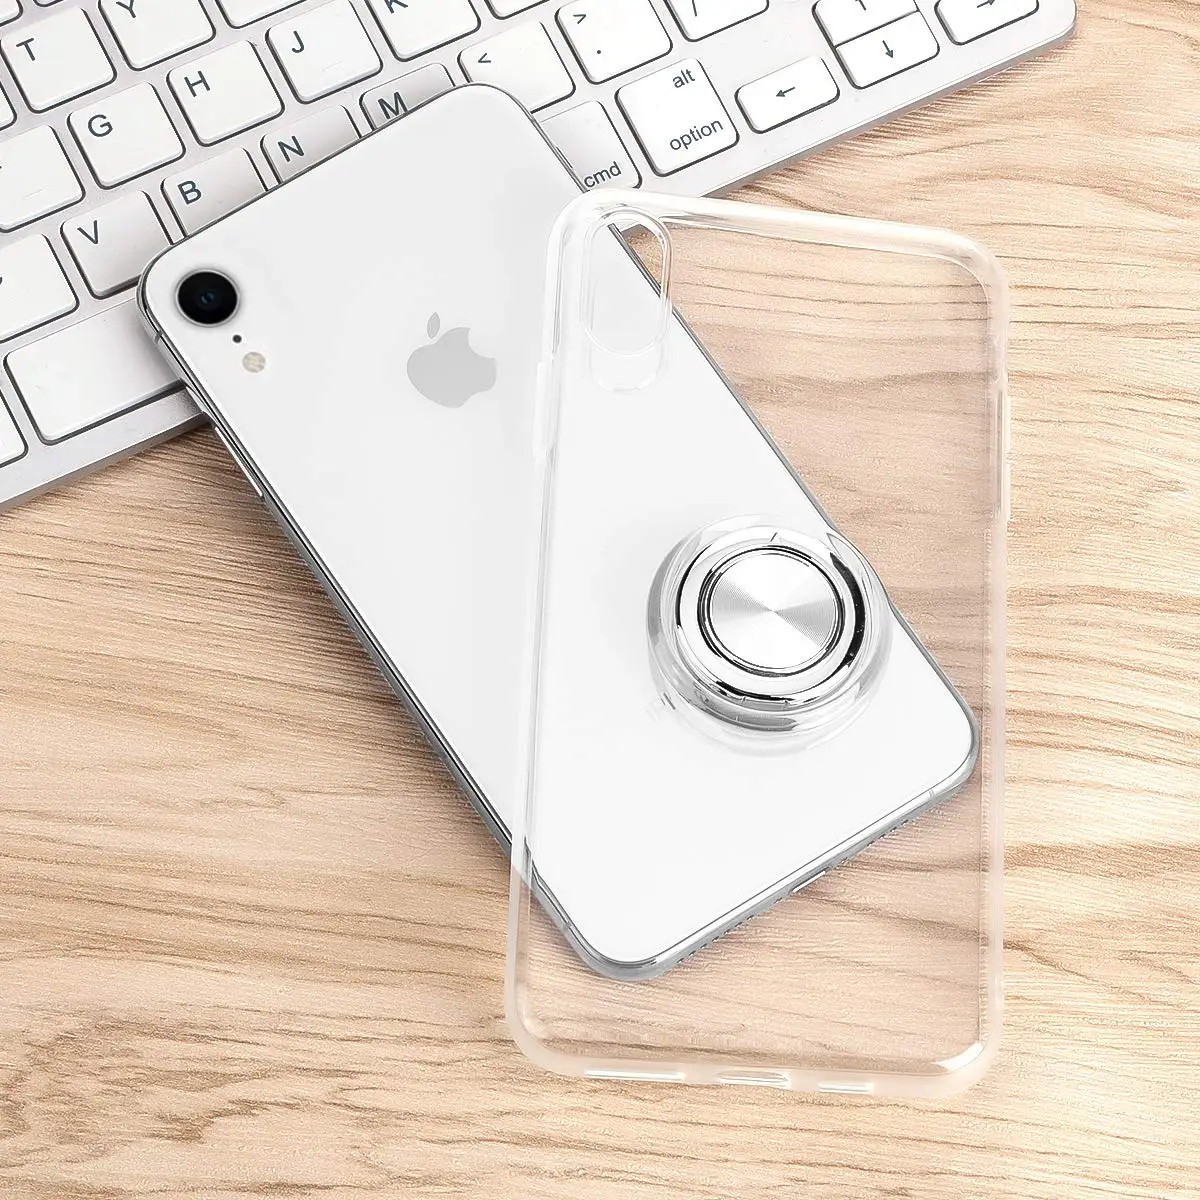 XR phone case ring holder clear cover TPU protective shell phone cover thin case for iPhone XR